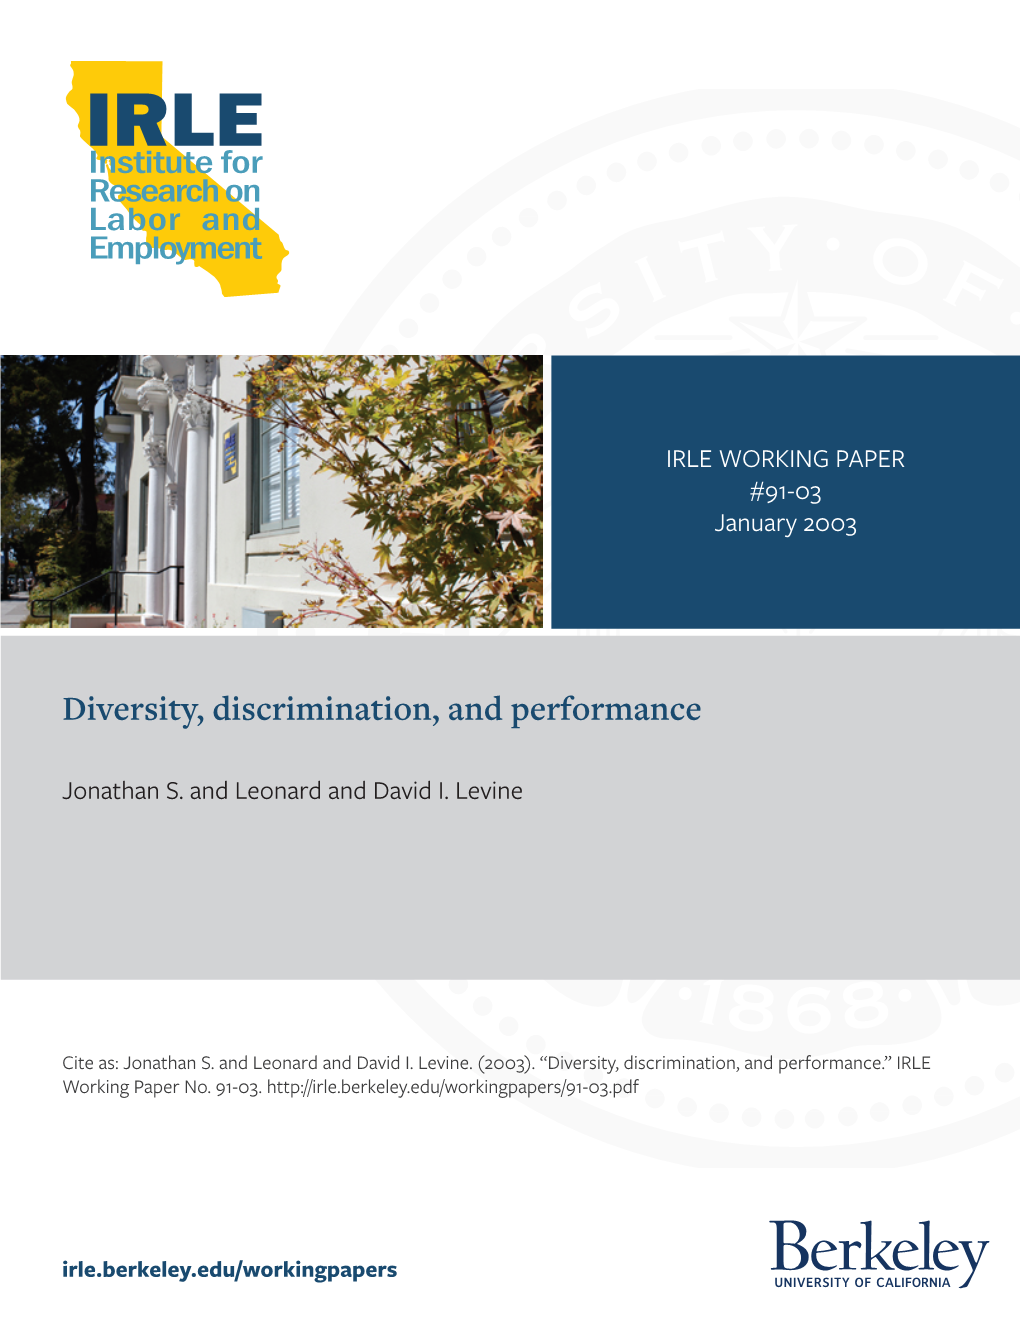 Diversity, Discrimination, and Performance